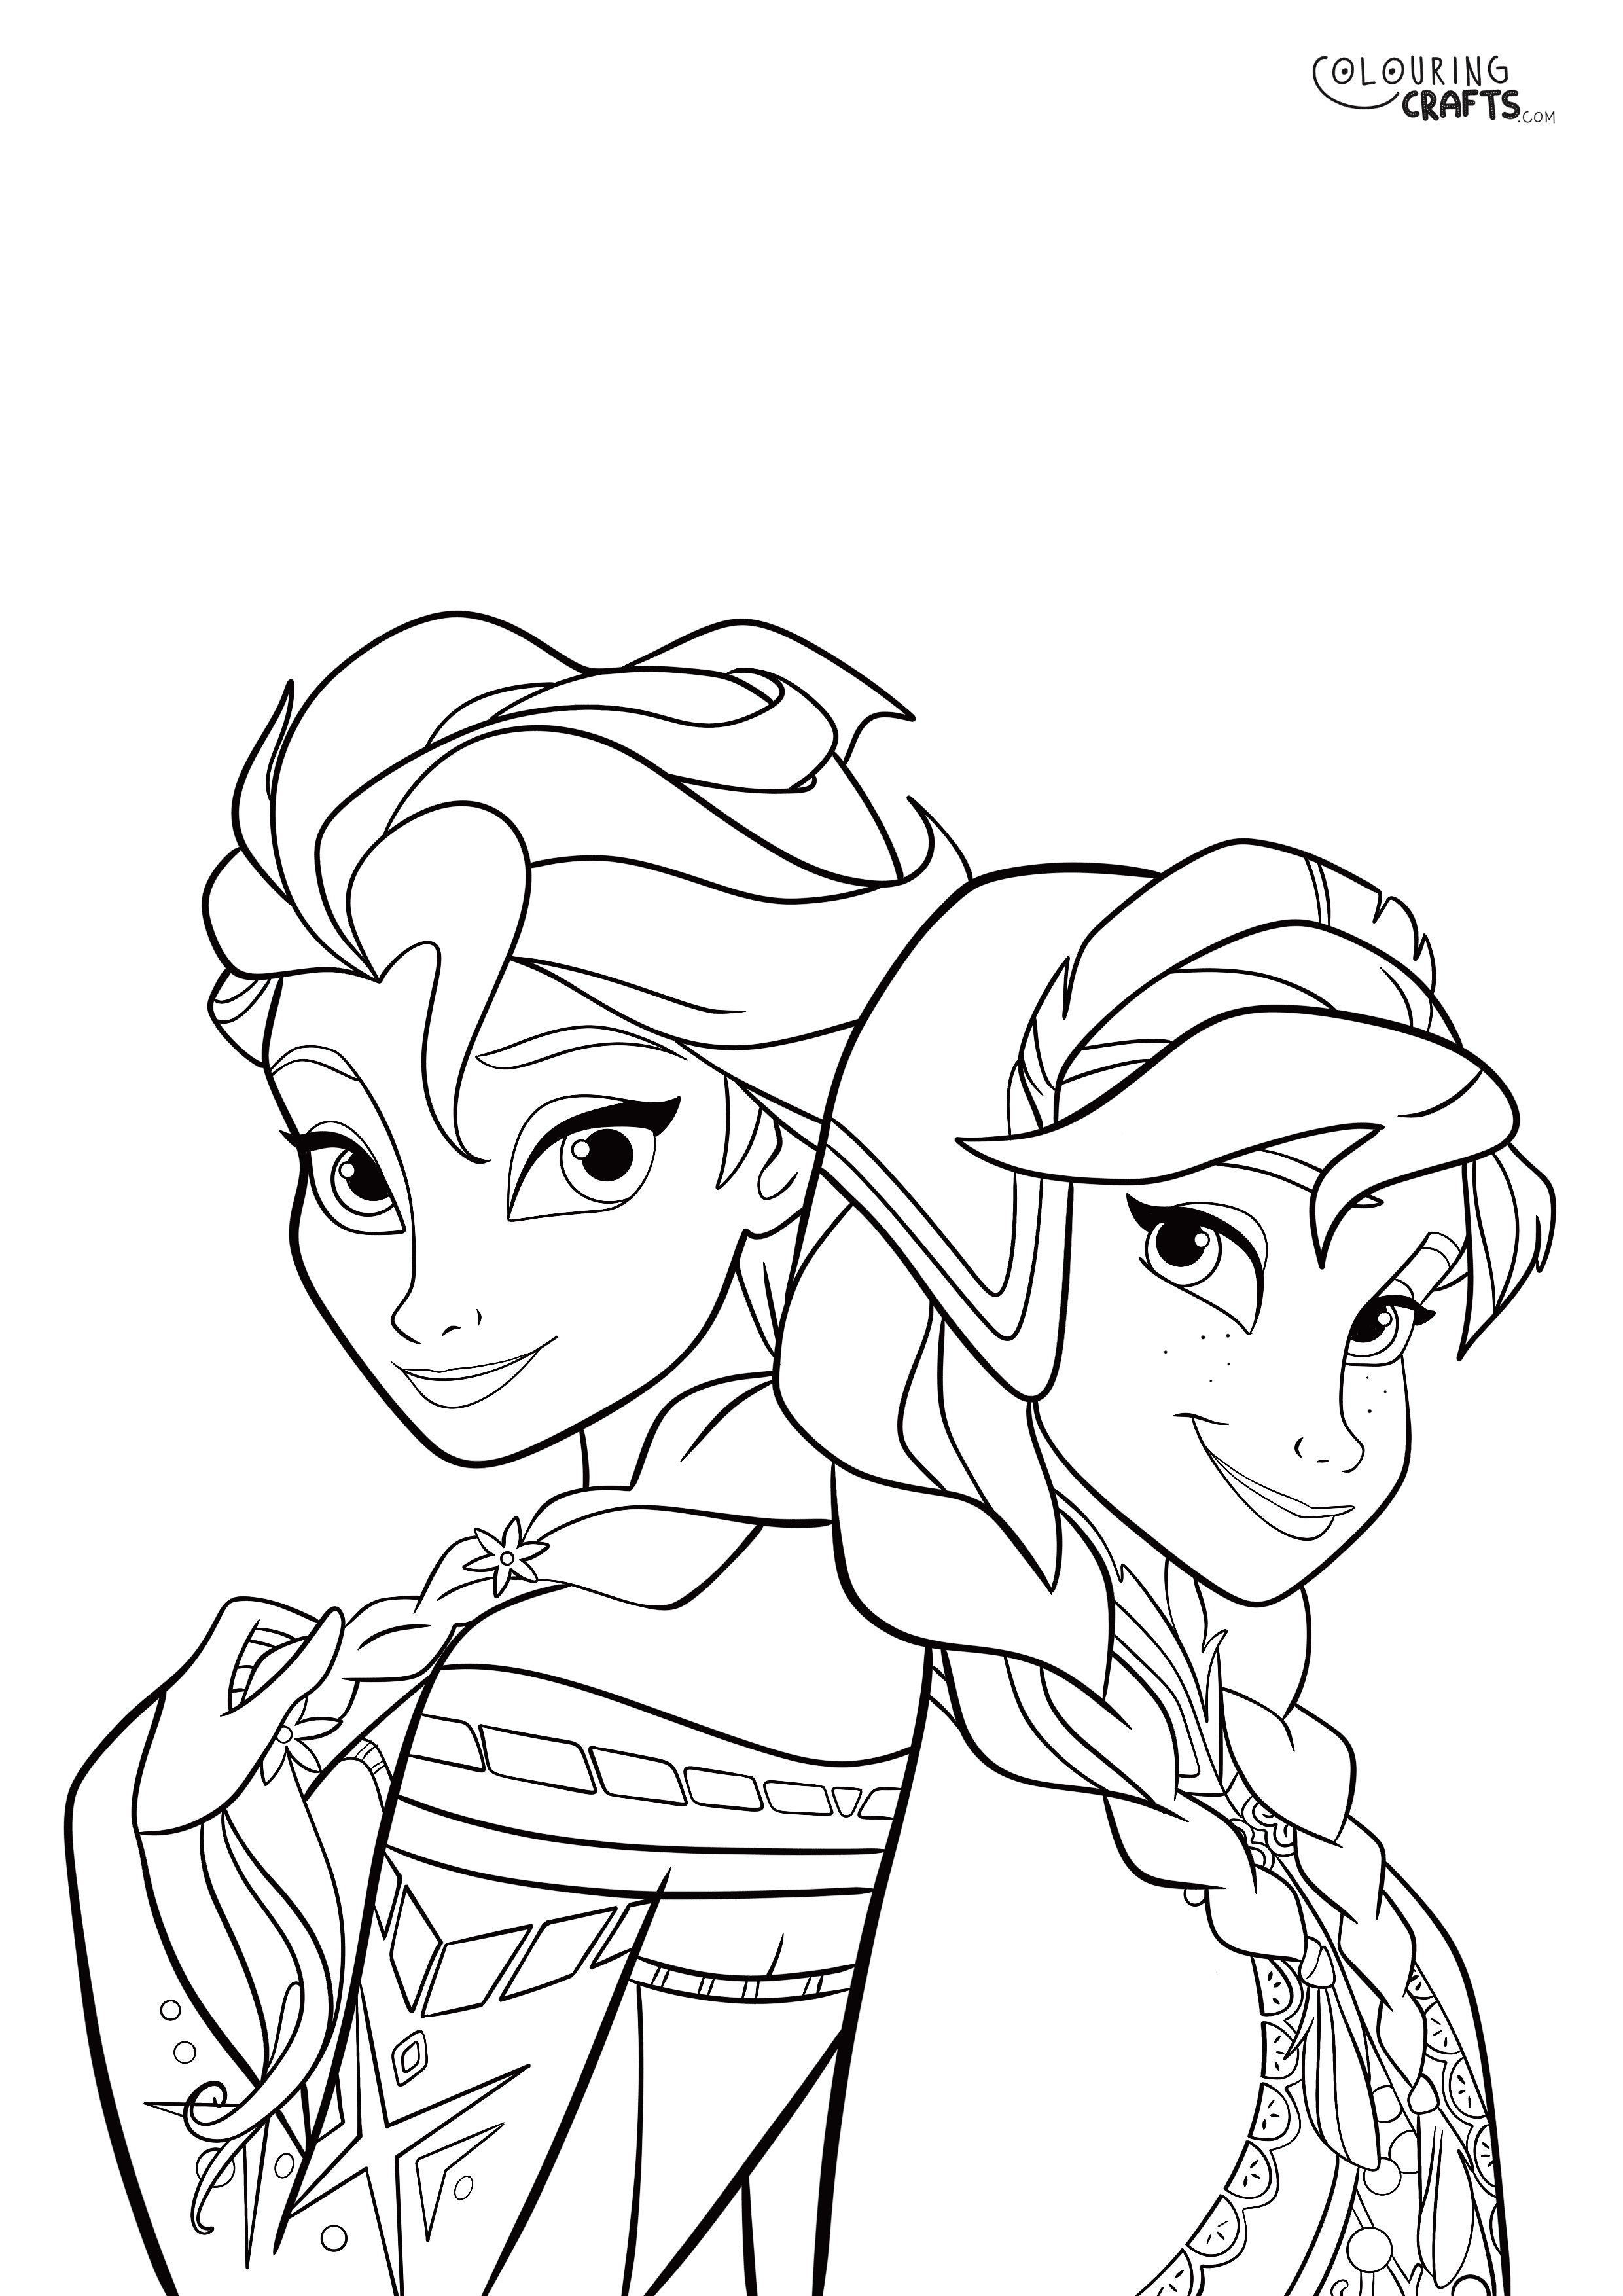 Disney Frozen Anna & Elsa Colouring Page - Colouring Crafts